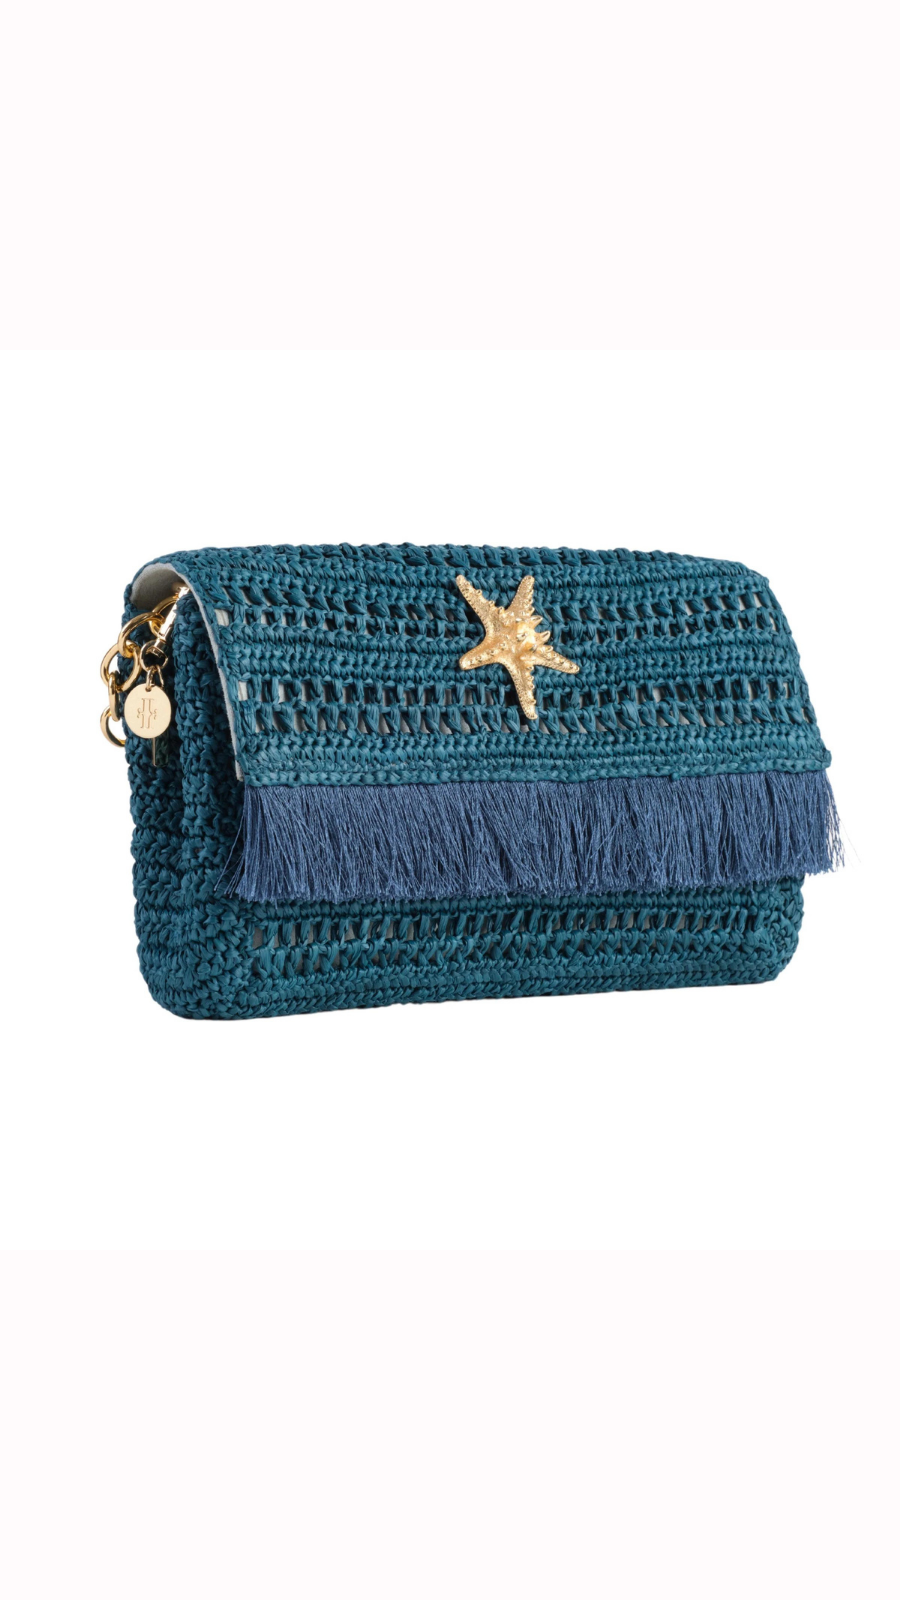 Thumbnail preview #1 for Slim Real Raffia Clutch